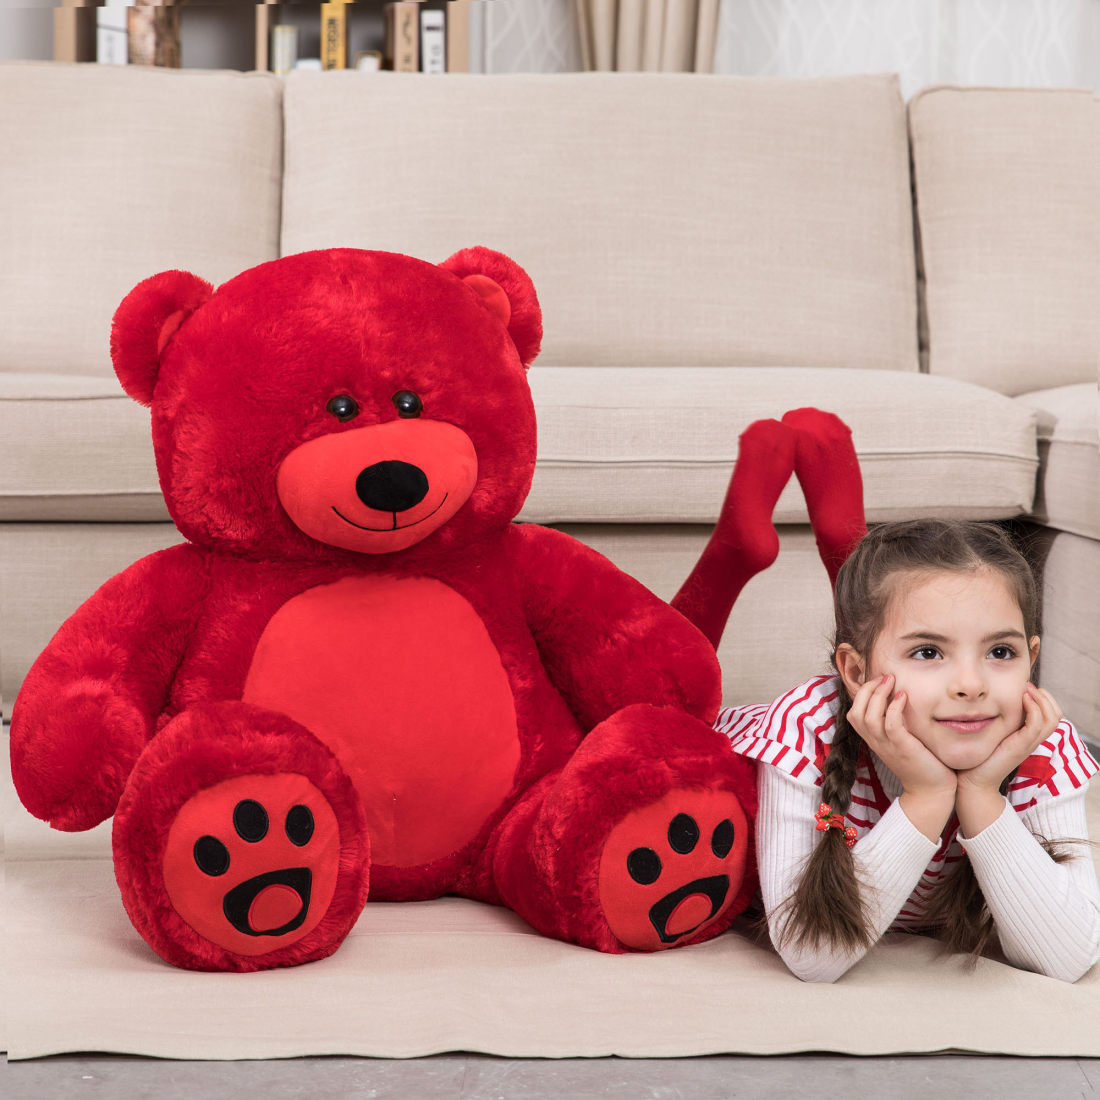 GIANT 63” (5 ft. 3 in.) RED Teddy Bear Stuffed Plush Toy from Joyfay®